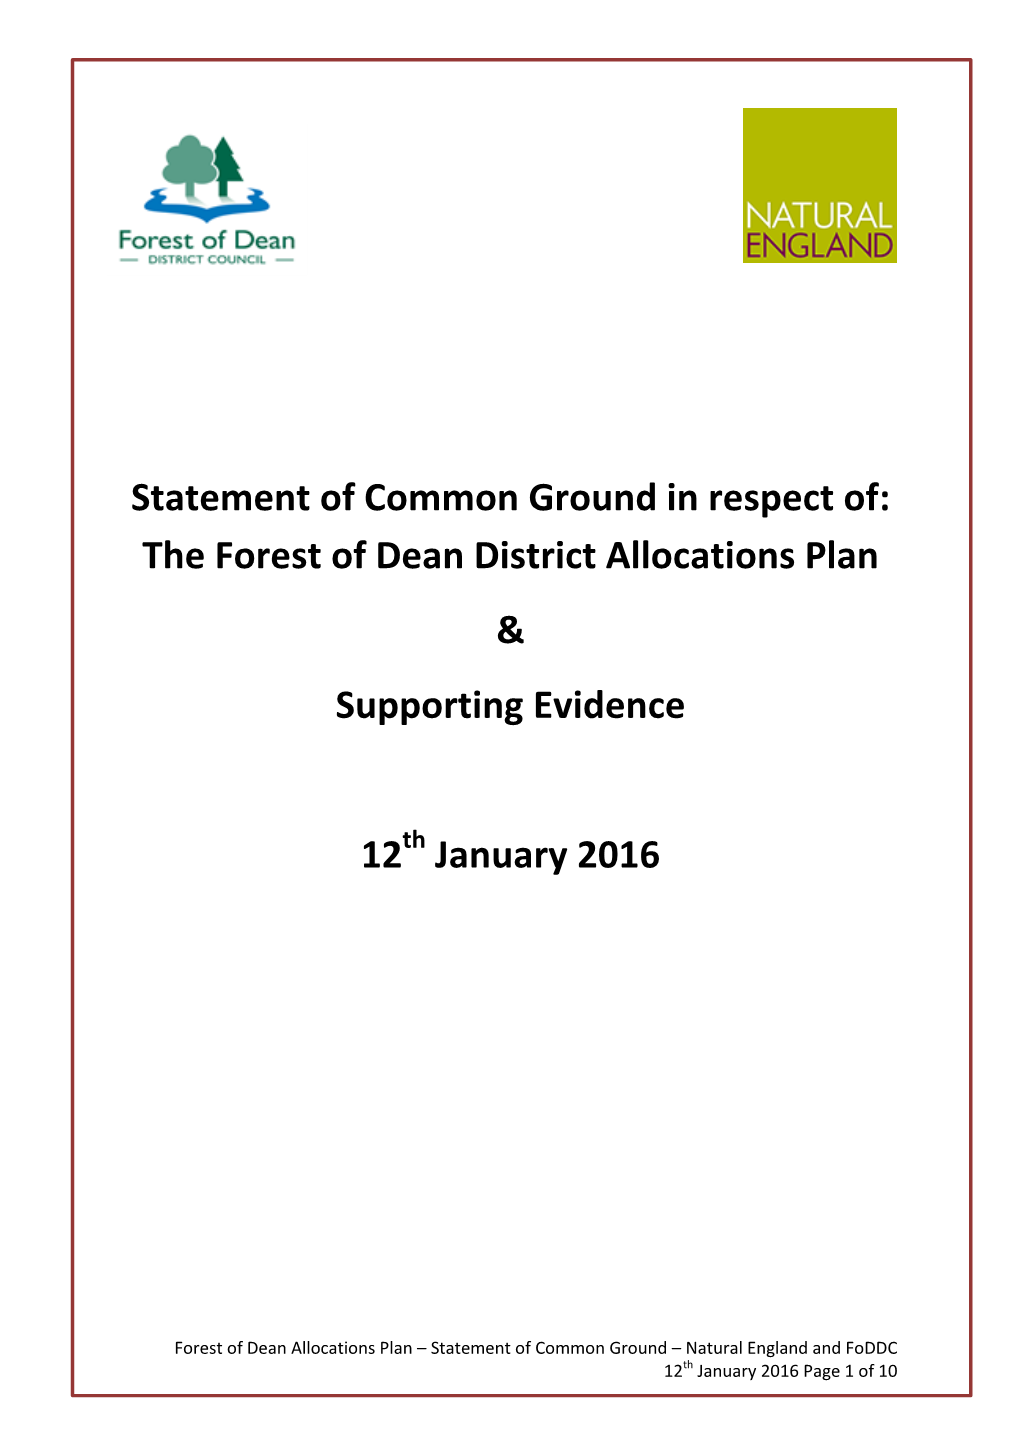 Statement of Common Ground in Respect Of: the Forest of Dean District Allocations Plan & Supporting Evidence